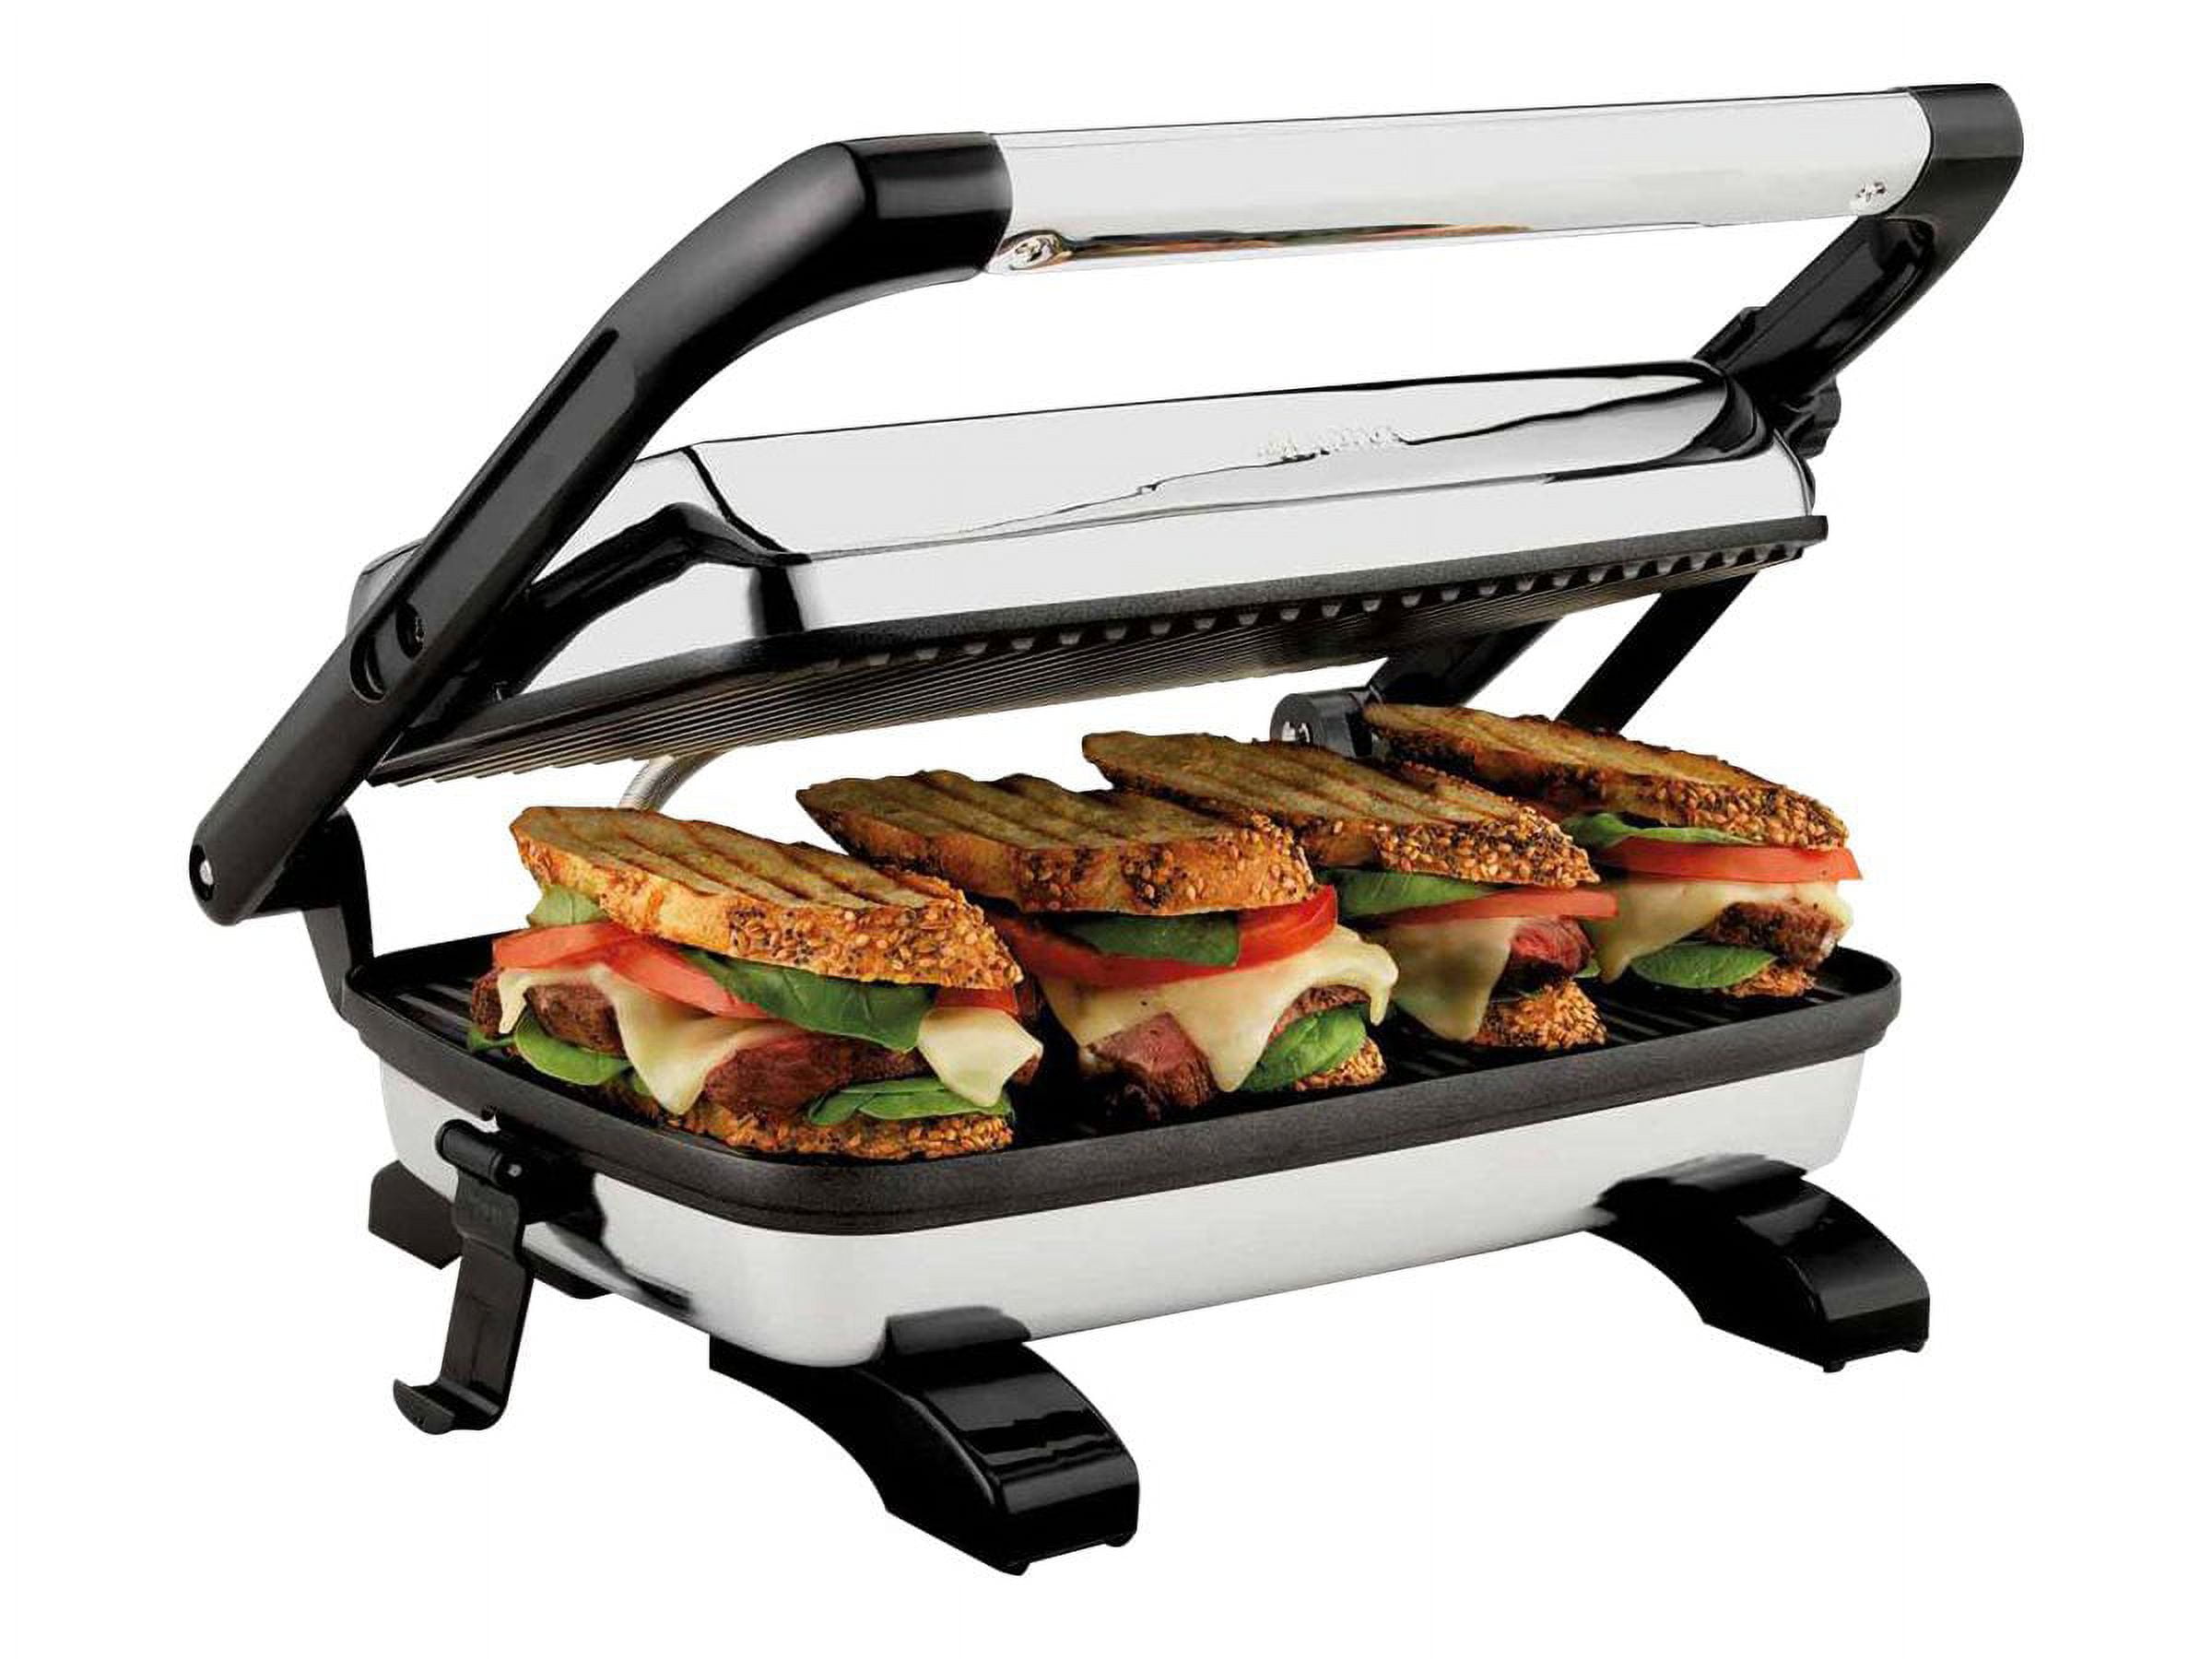  Hamilton Beach Panini Press, Sandwich Maker & Electric Indoor  Grill, Upright Storage, Nonstick Easy Clean Grids, Stainless Steel (25410)  & Dual Breakfast Sandwich Maker with Timer, Silver (25490A): Home & Kitchen